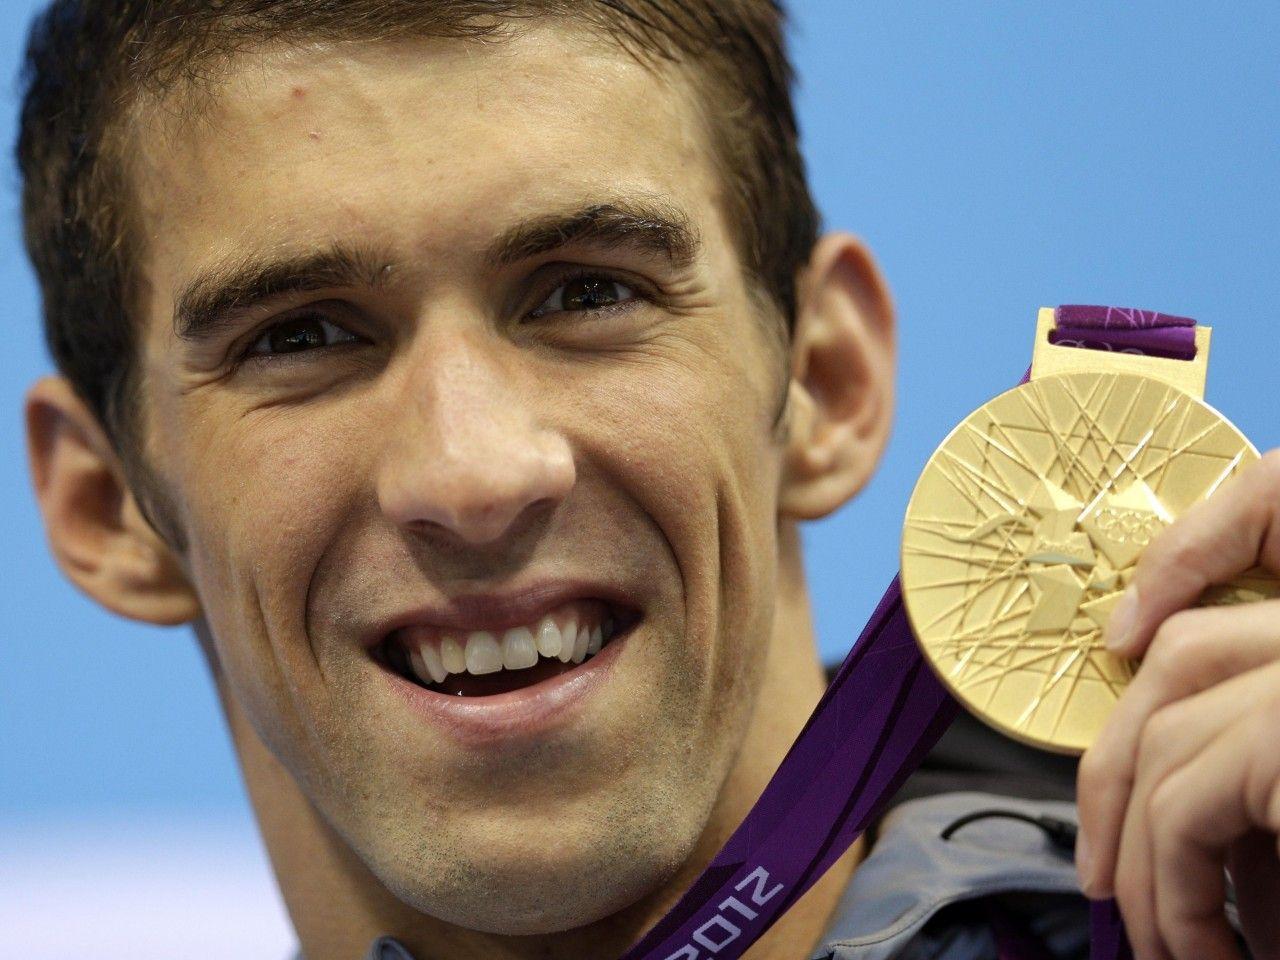 Awesome Michael Phelps HD Wallpaper Free Download